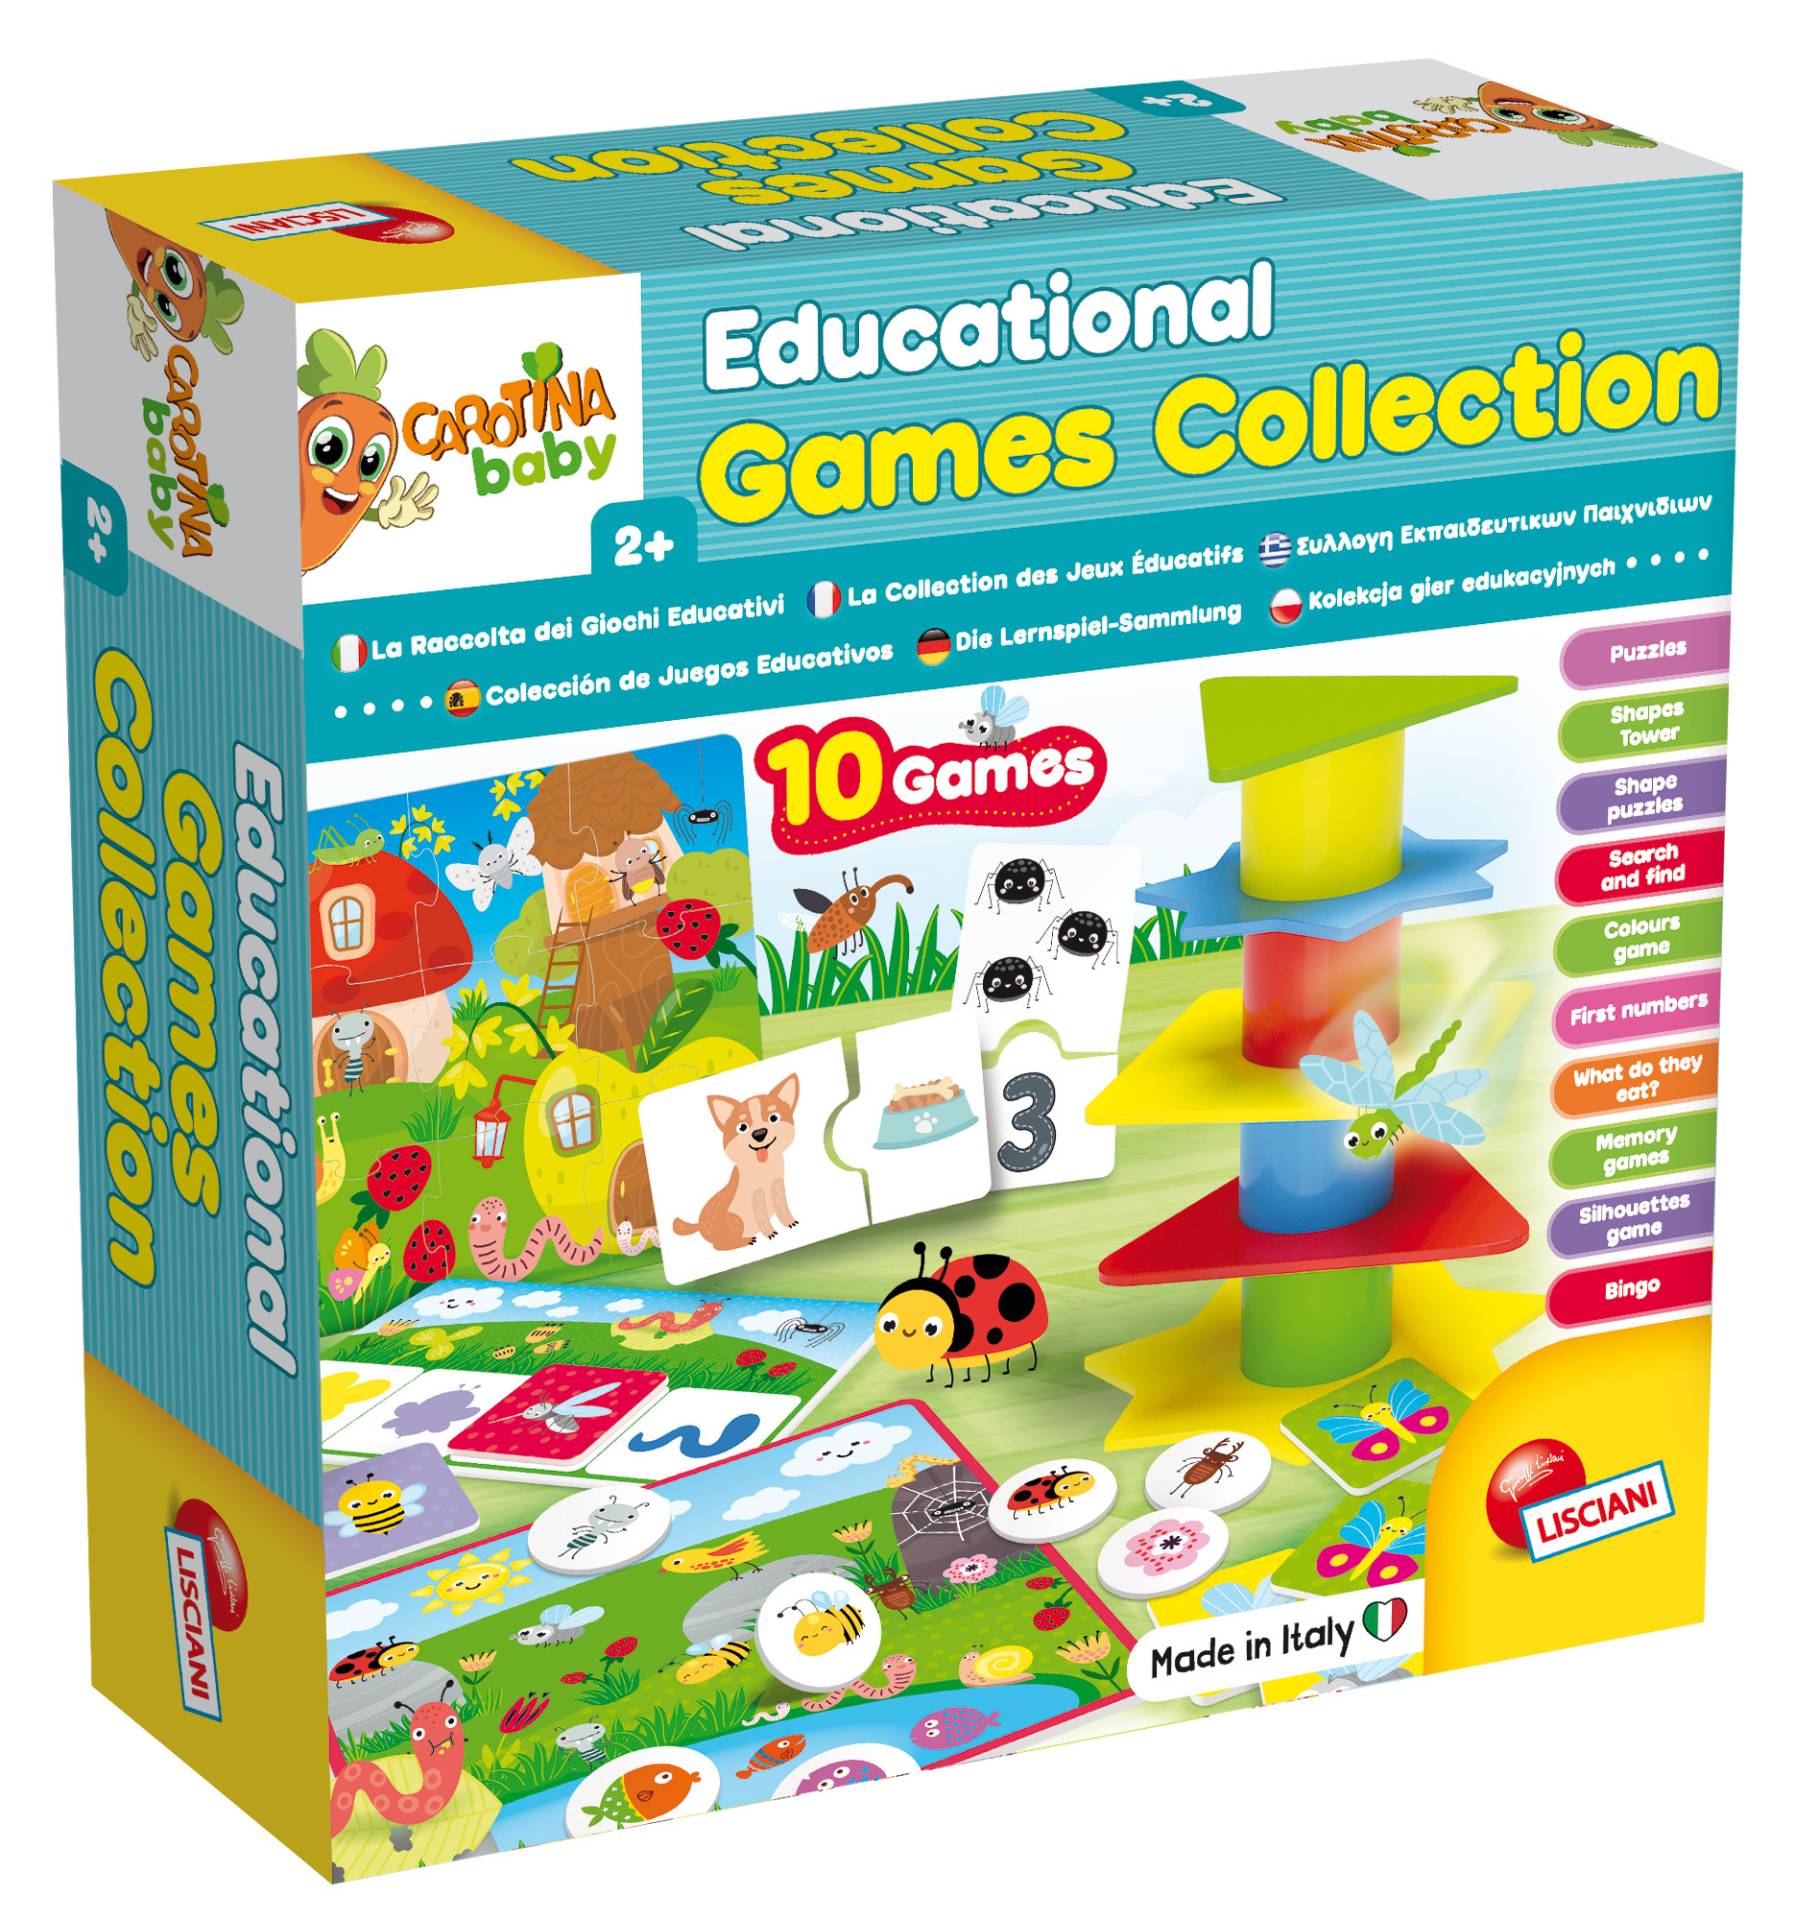 Foto 1 des Spiels CAROTINA BABY EDUCATIONAL GAMES COLLECTION